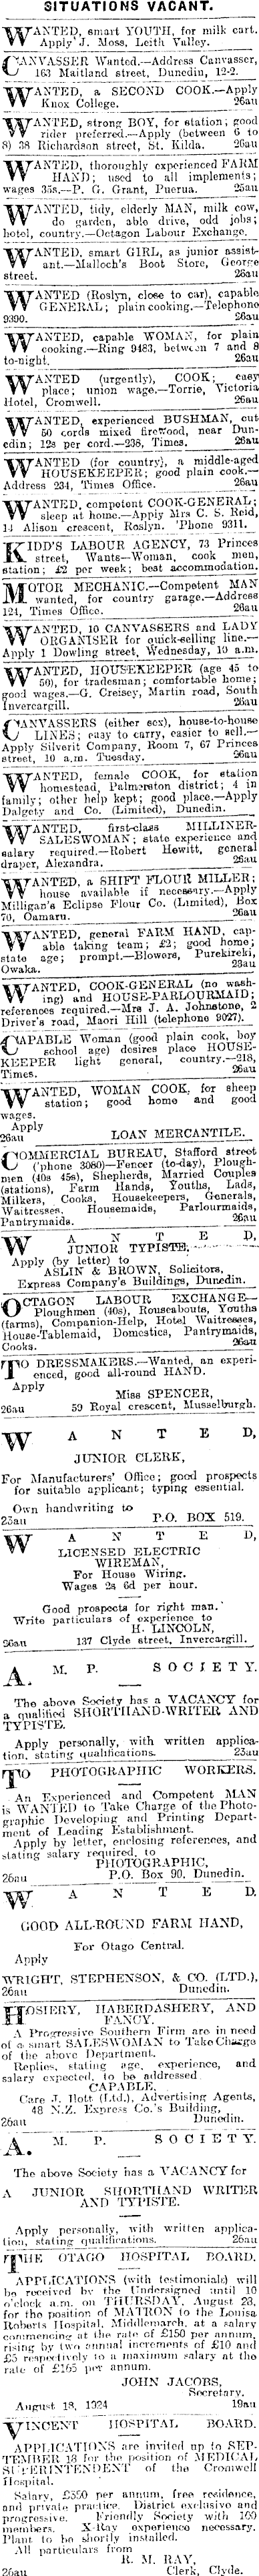 Papers Past Newspapers Otago Daily Times 26 August 1924 Page 1 Advertisements Column 4